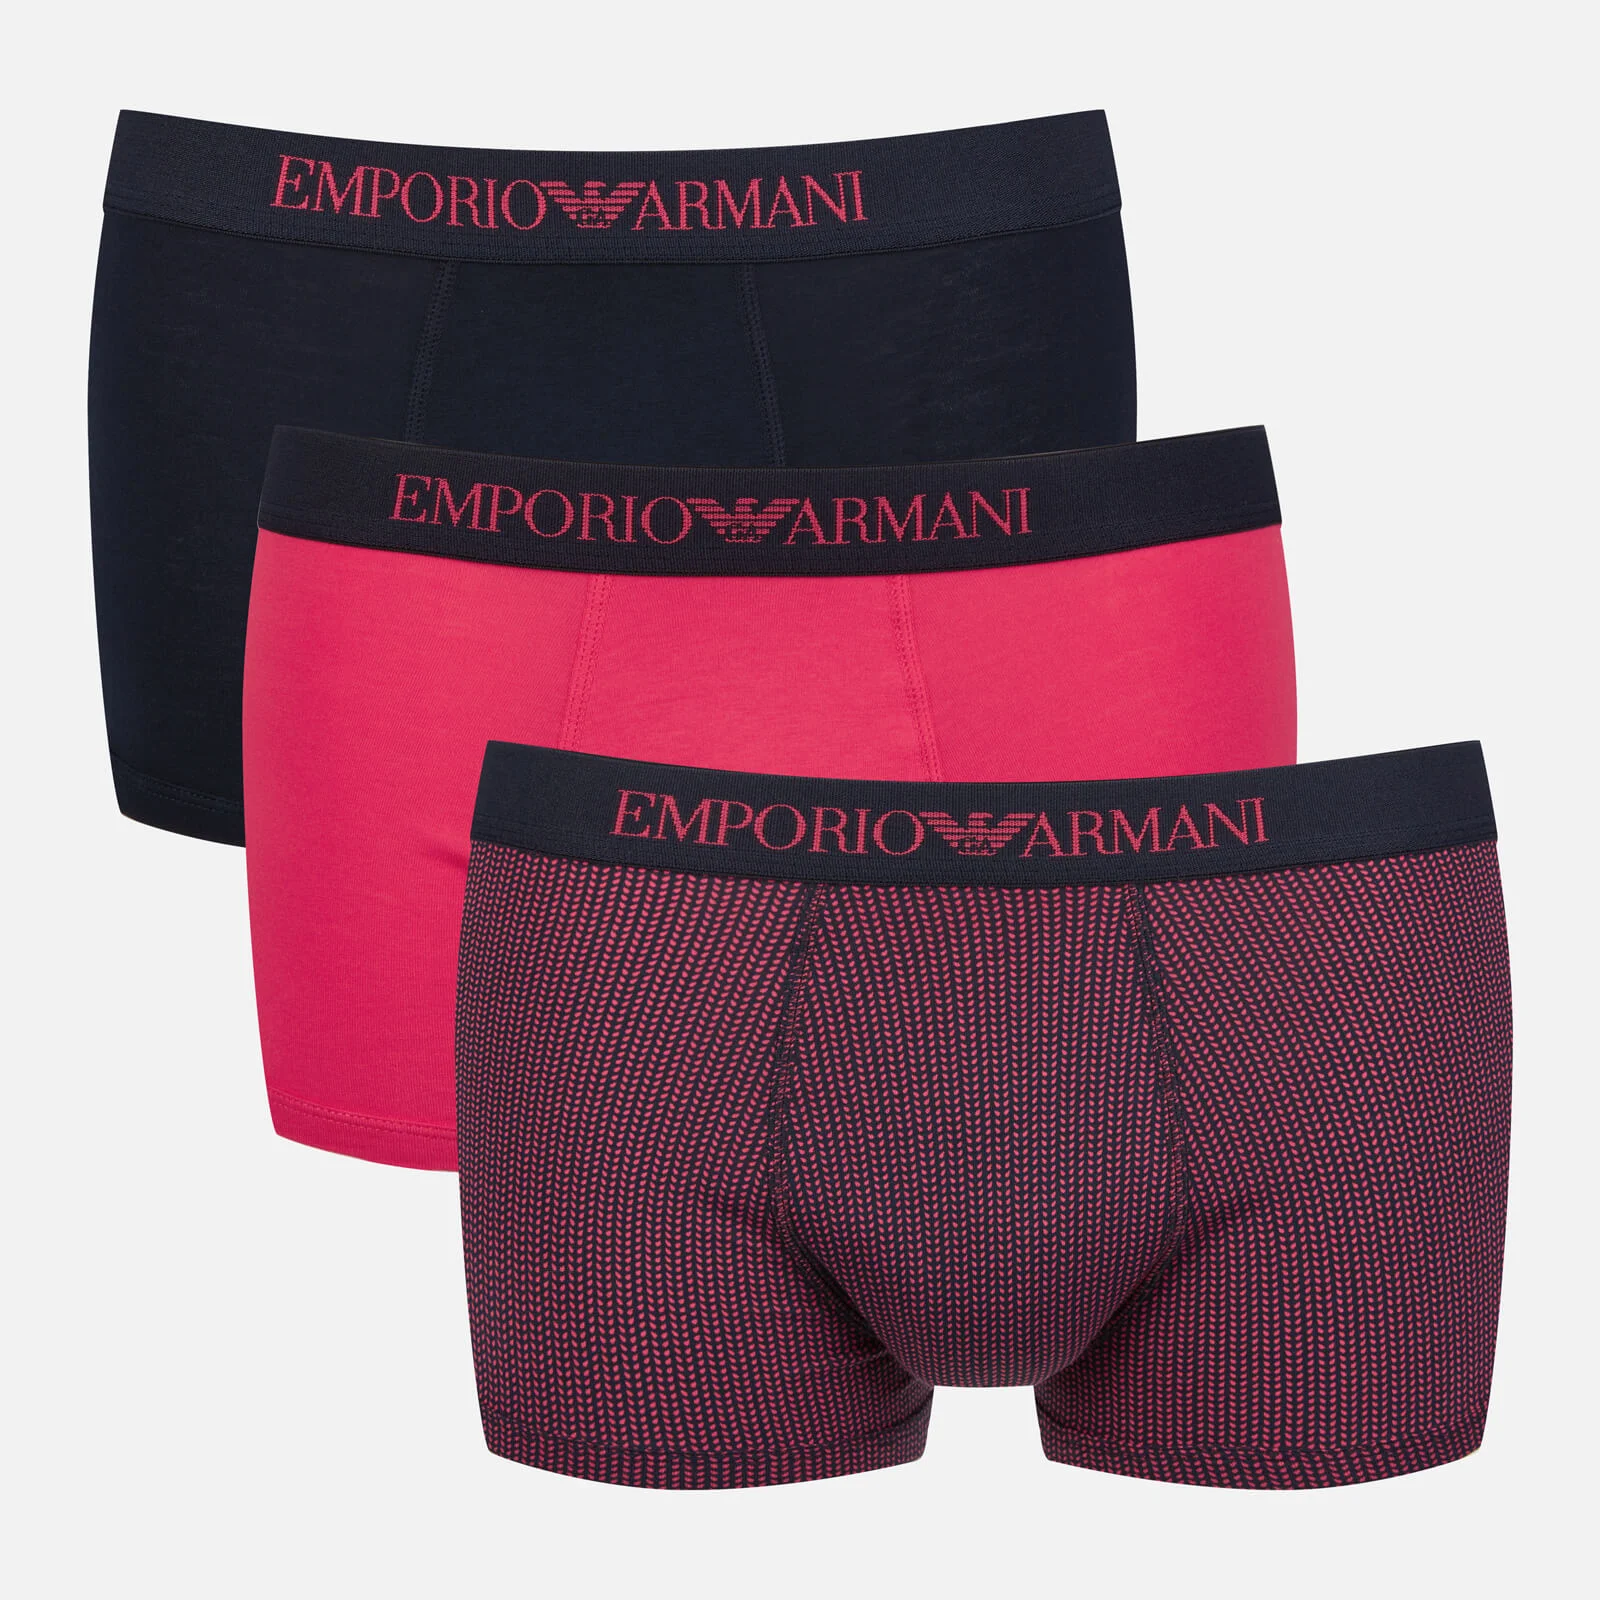 Emporio Armani Men's 3 Pack Boxer Shorts - Red Image 1